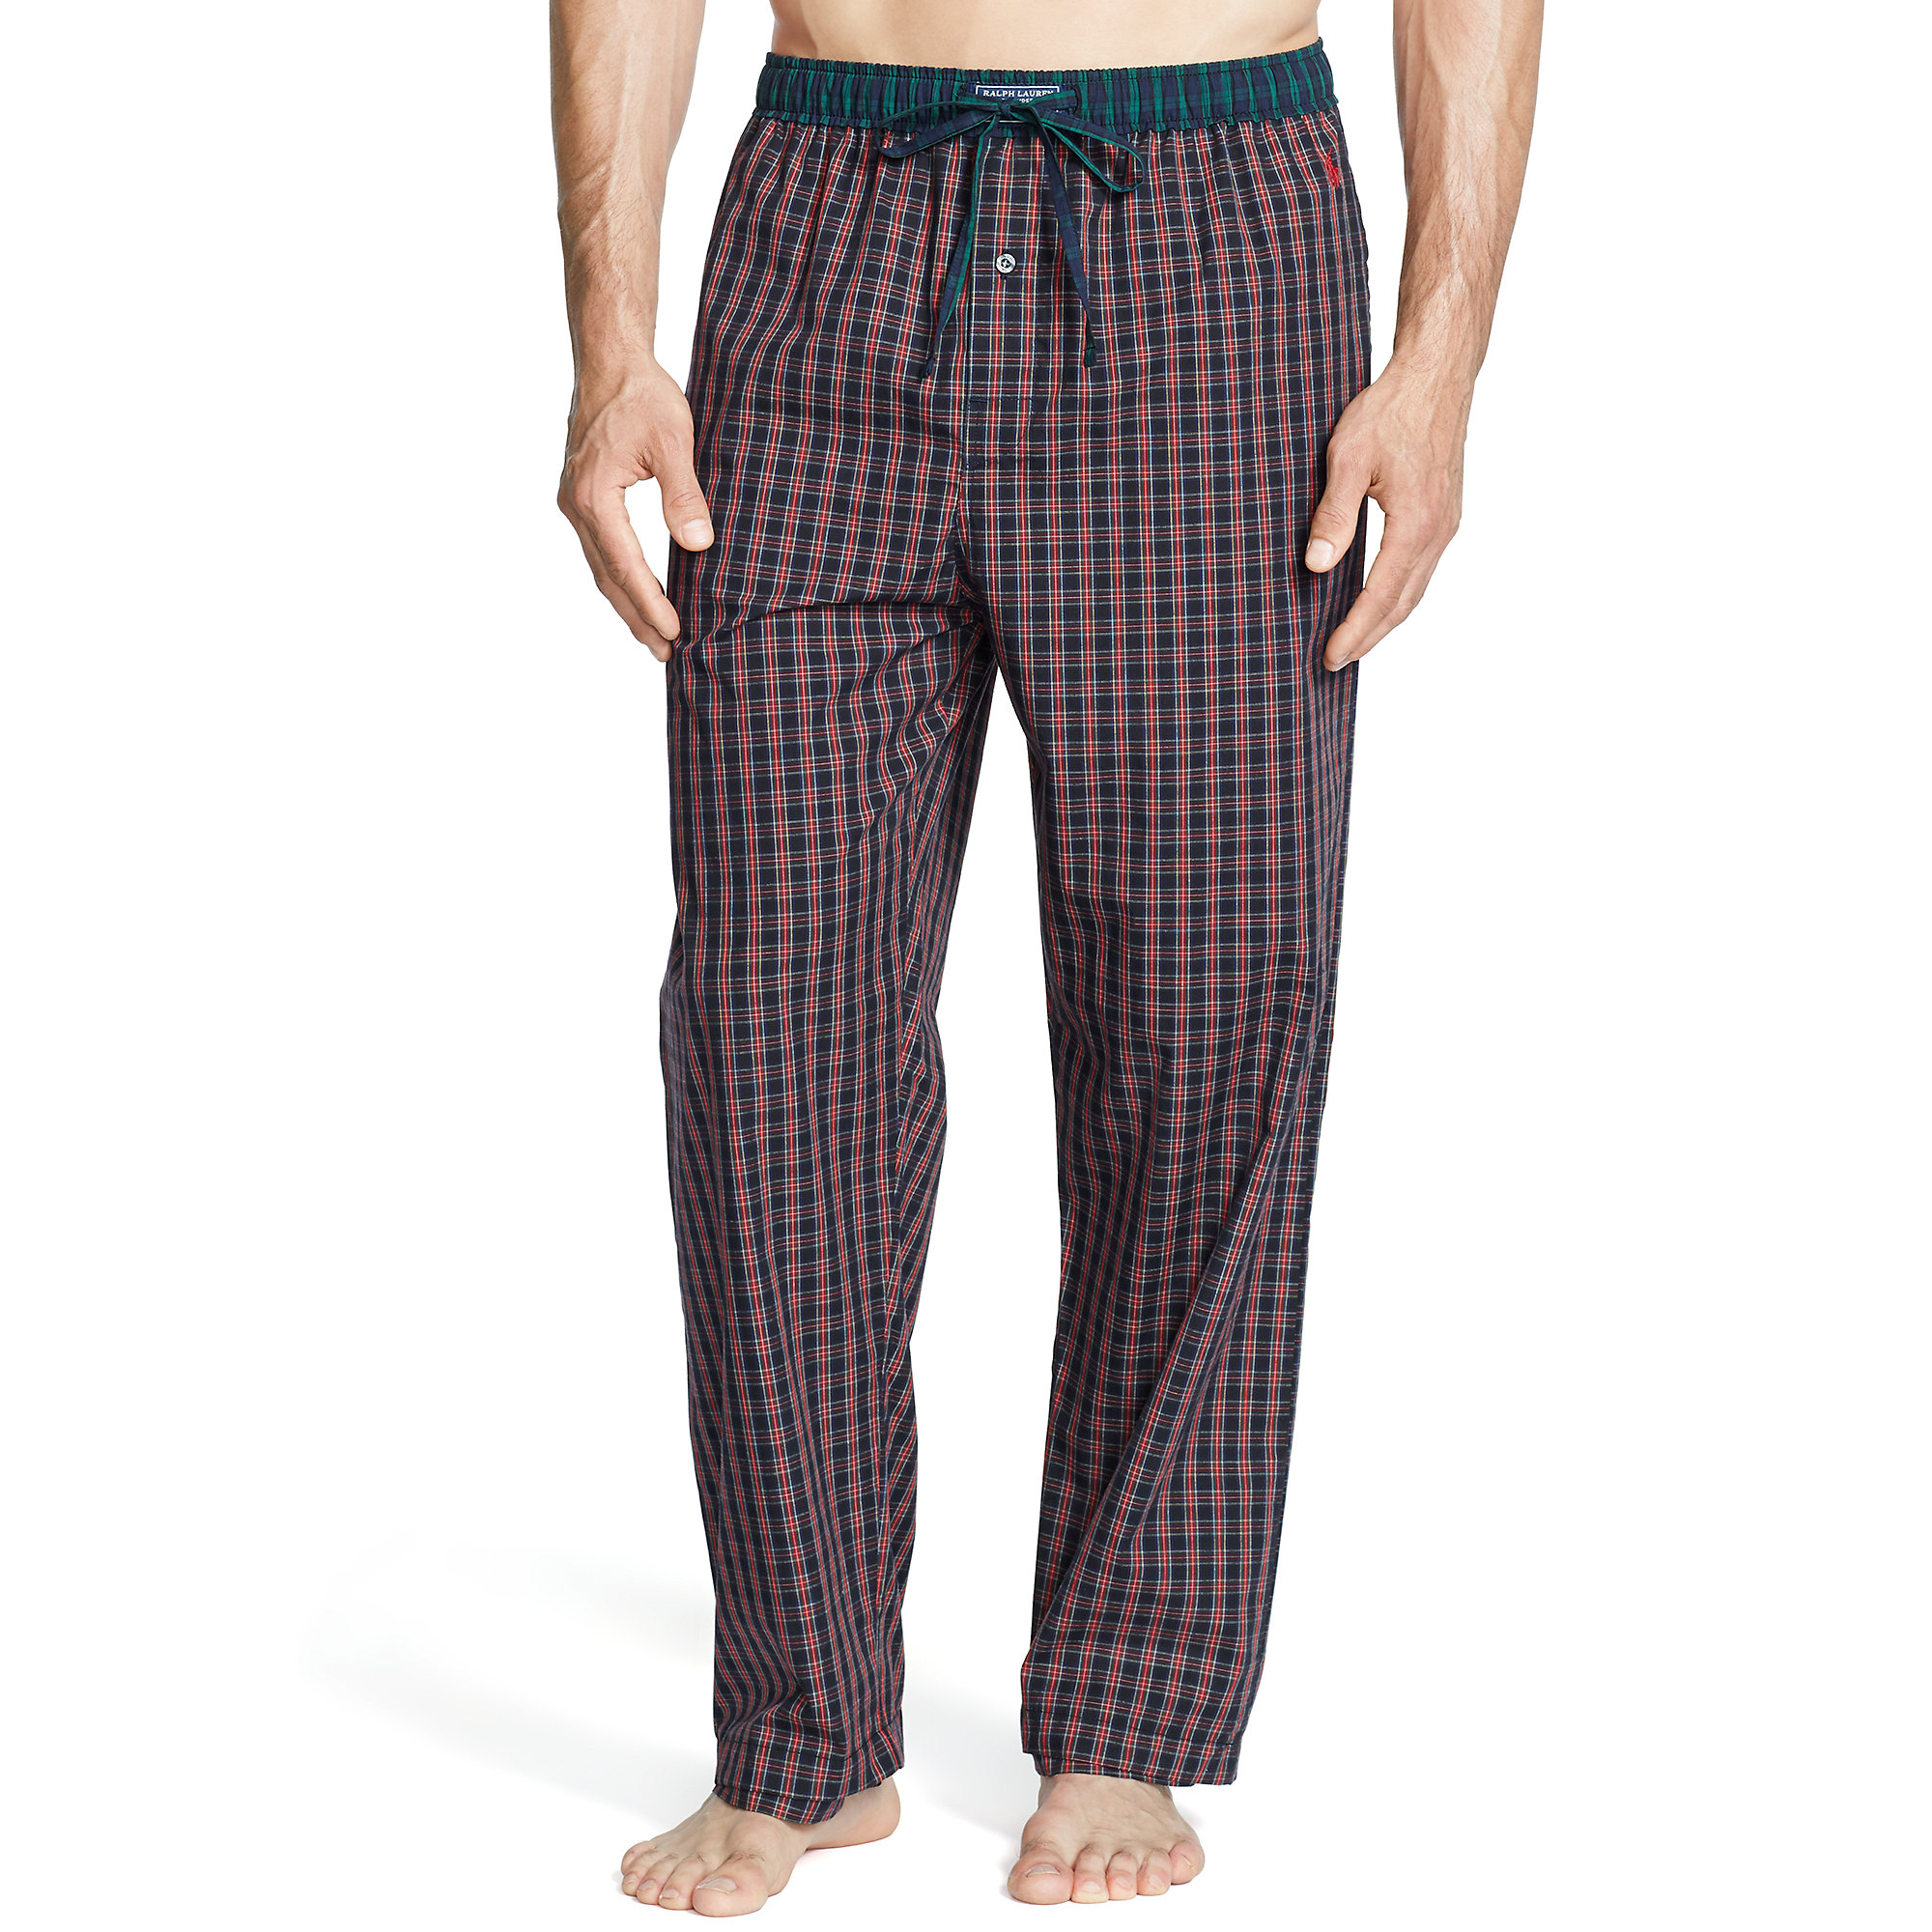 Polo Ralph Lauren Plaid Cotton Pajama Pant in Red for Men - Lyst